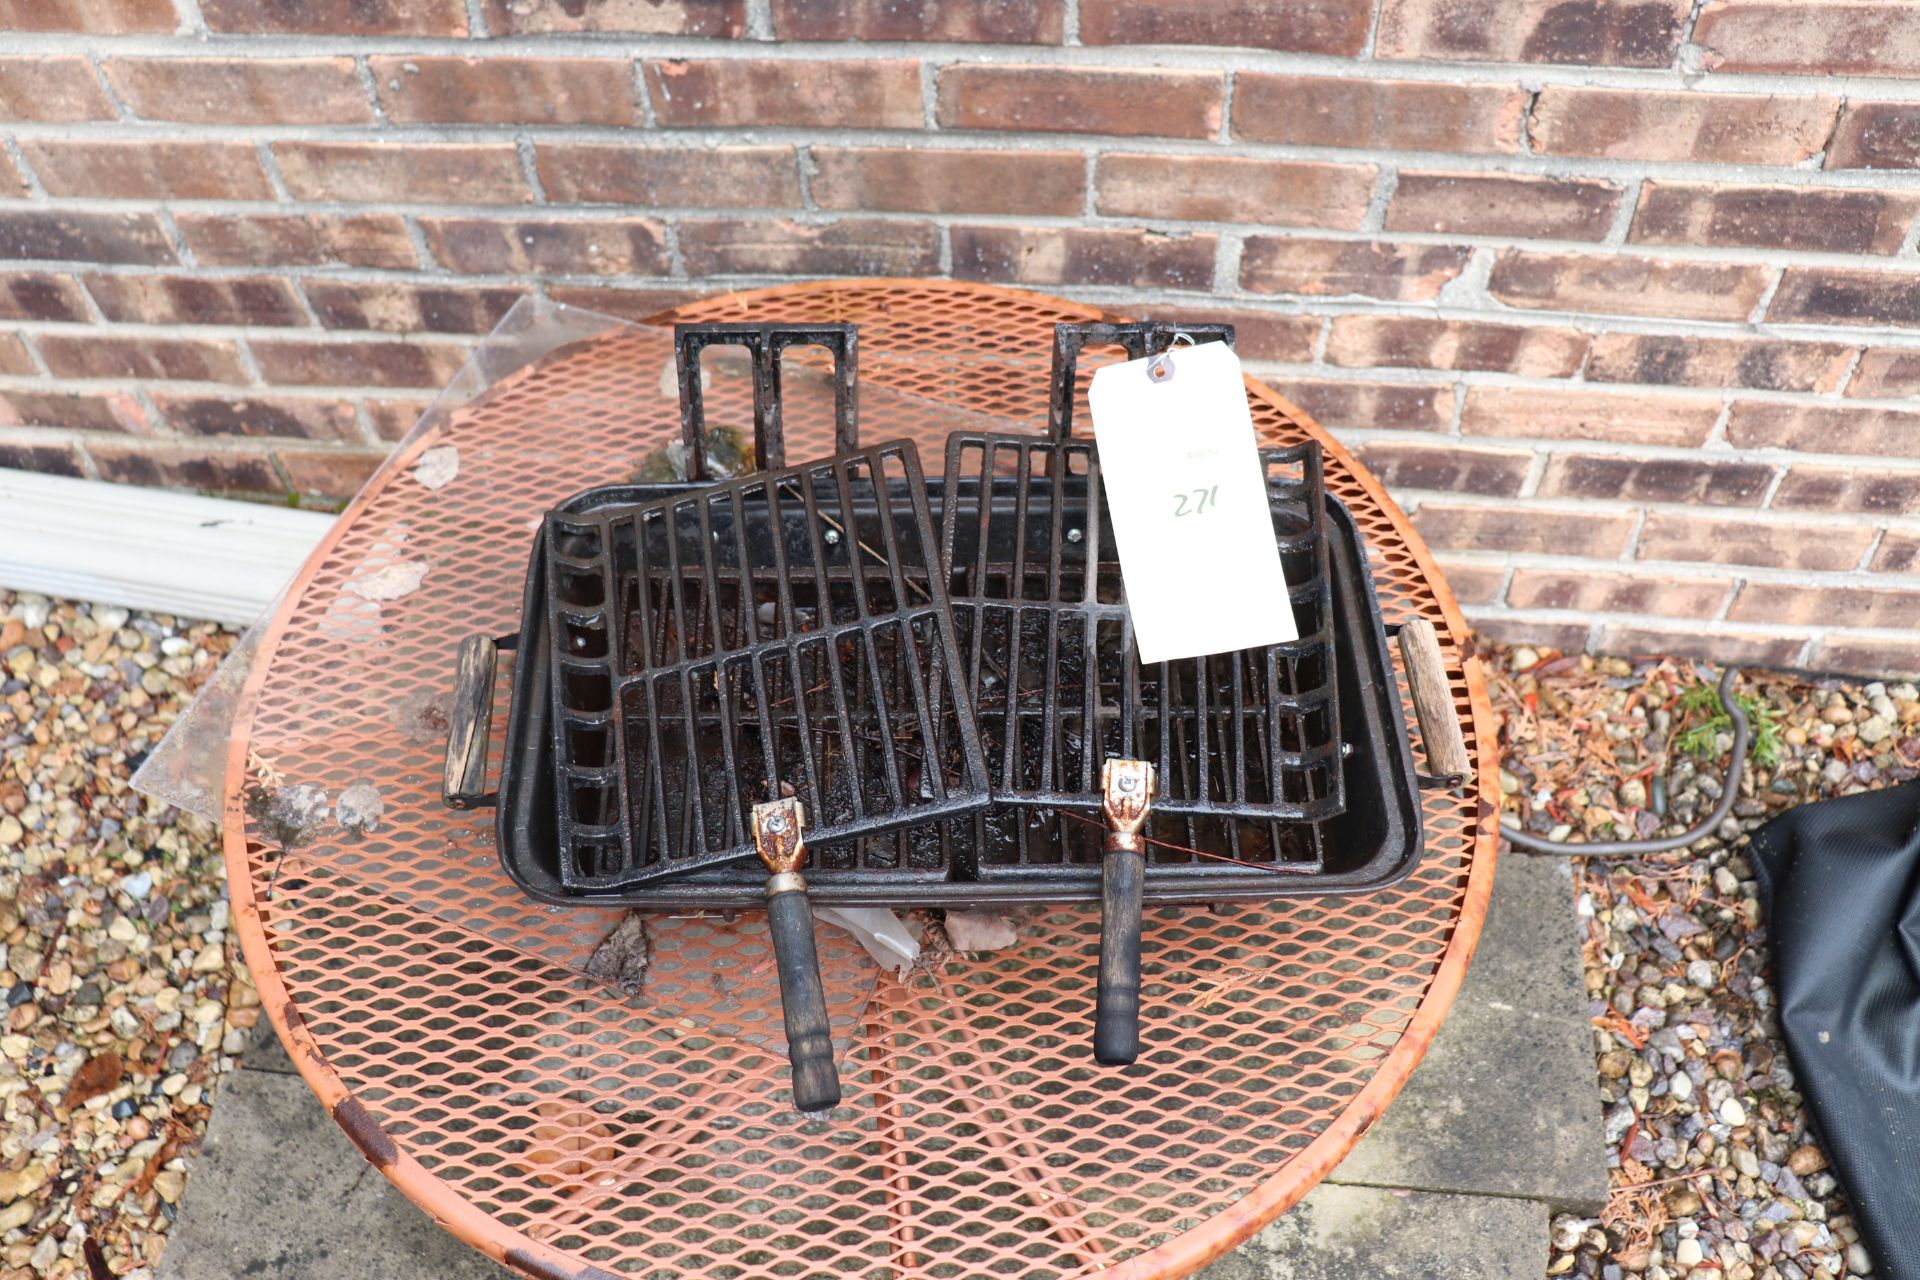 Tabletop grill with table